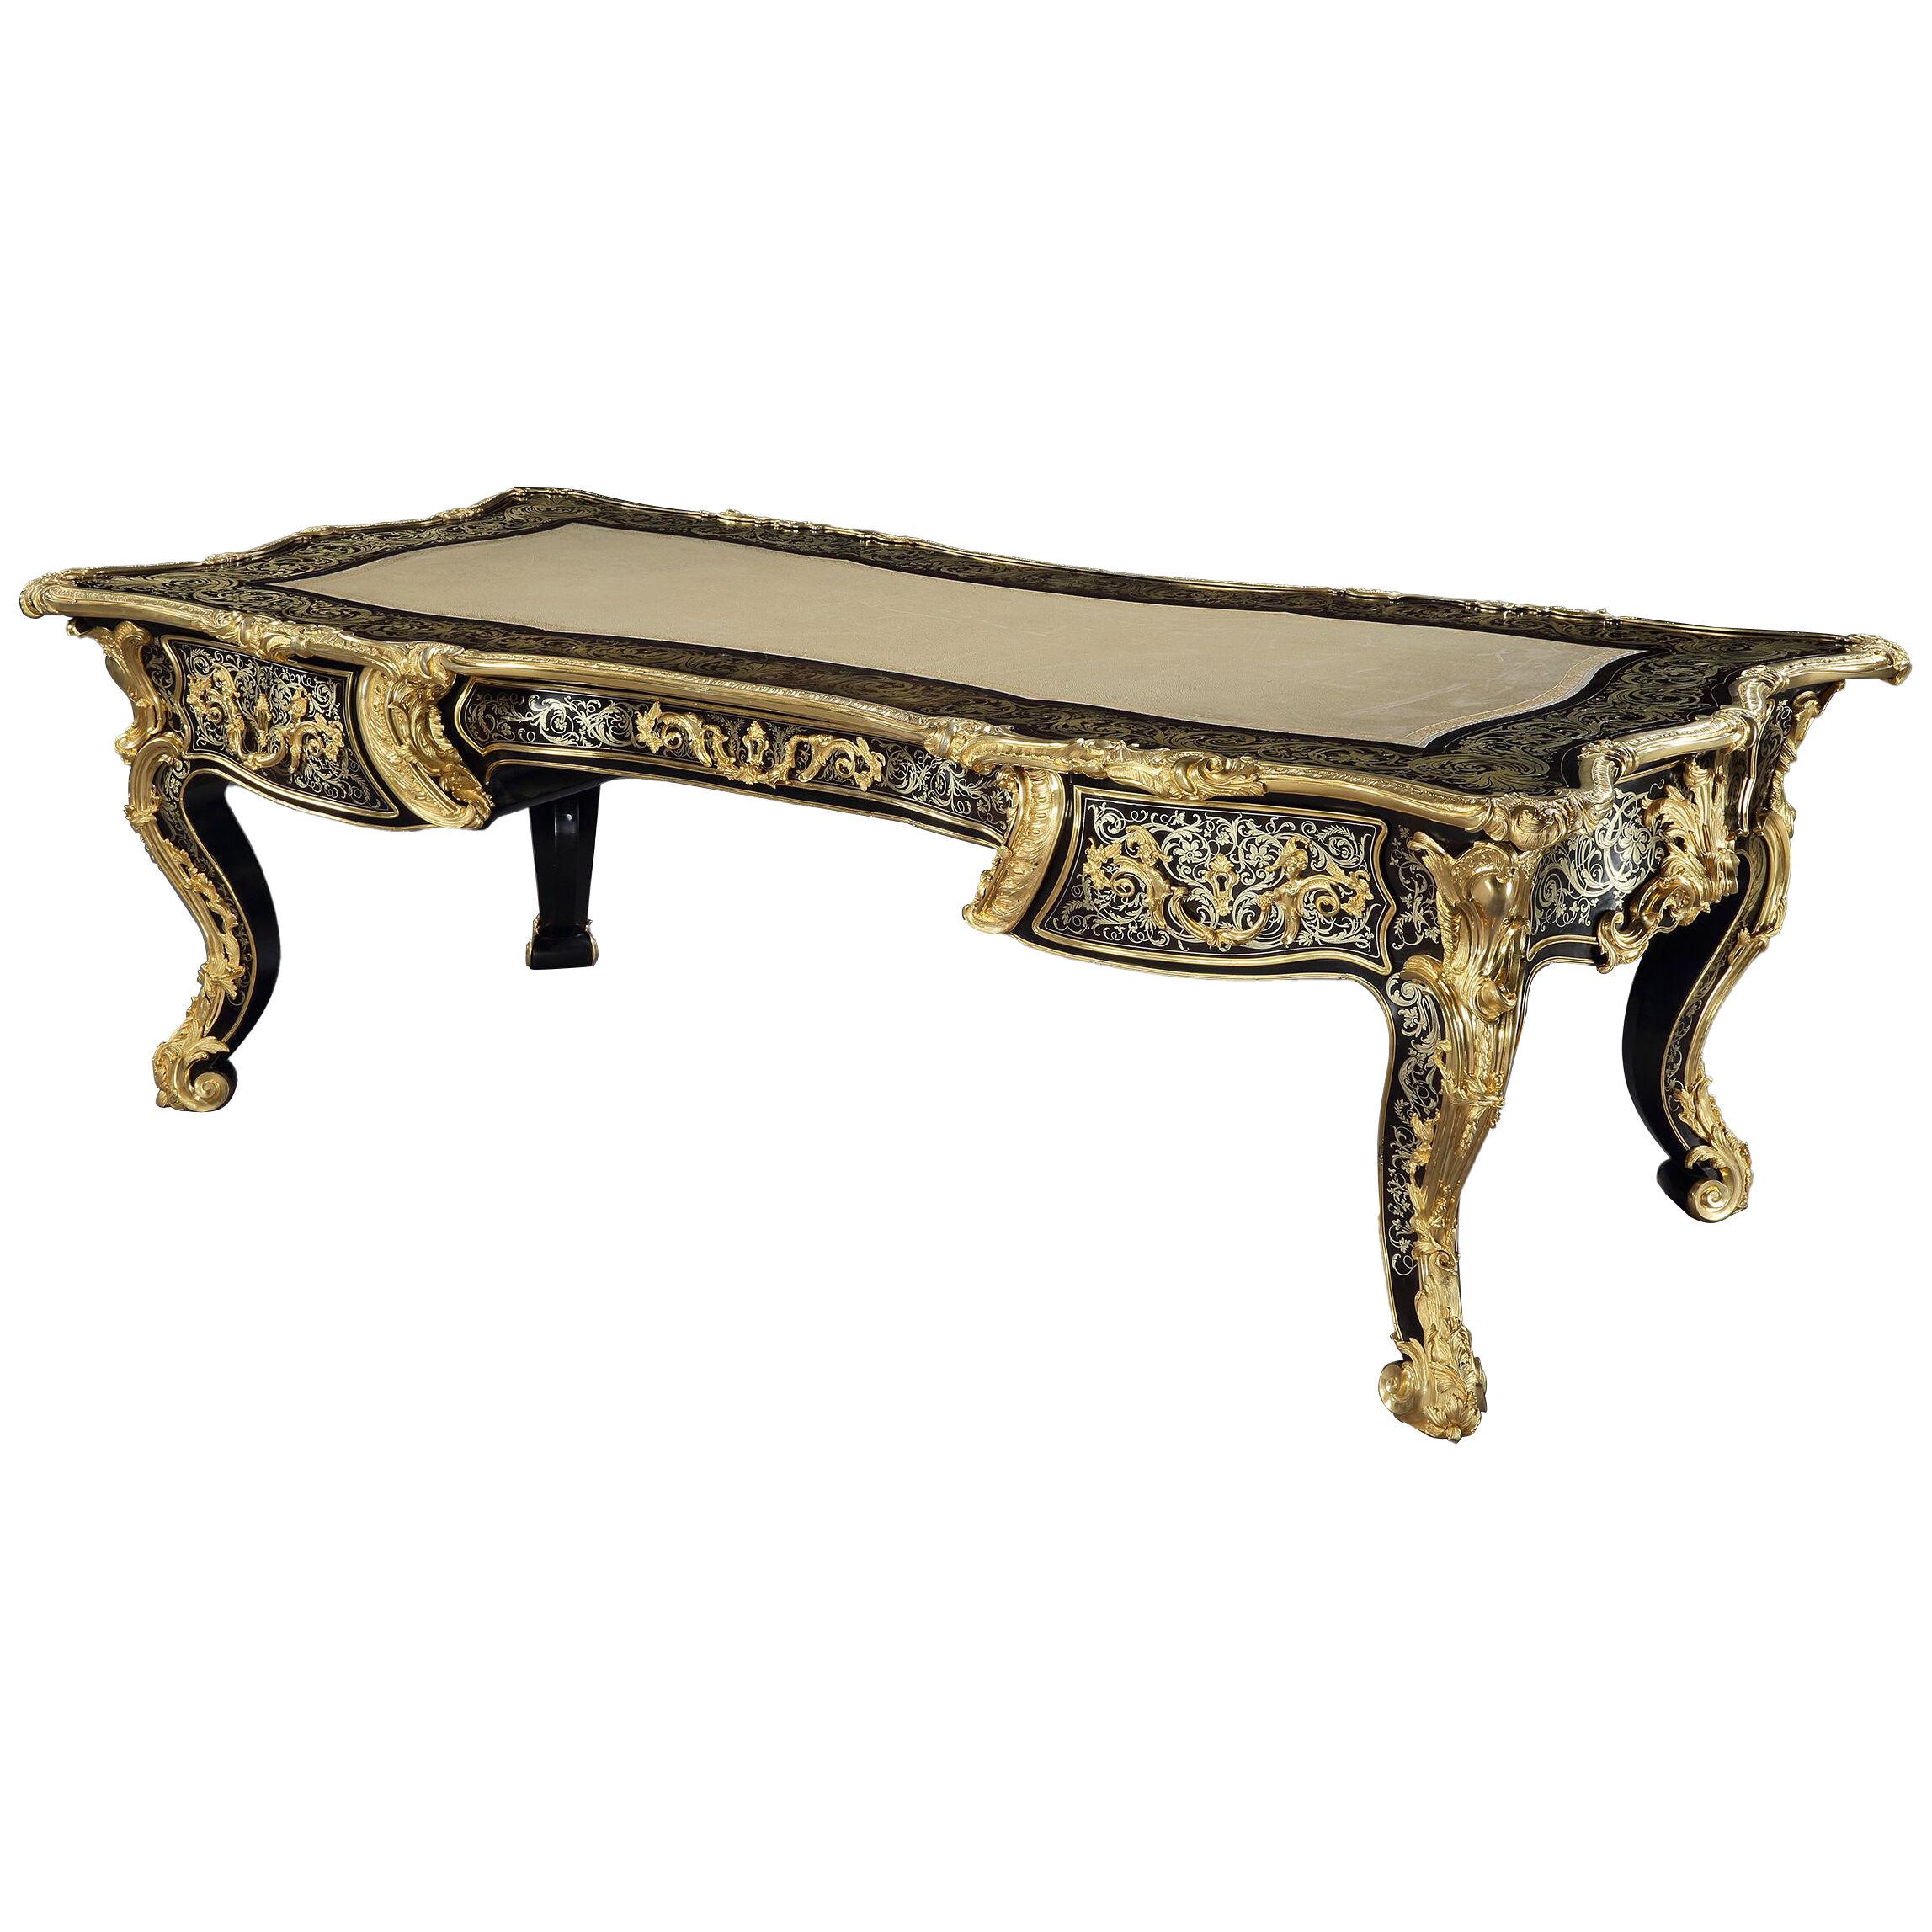 'James Bond' Boulle Marquetry Writing Desk in the Louis XIV Manner